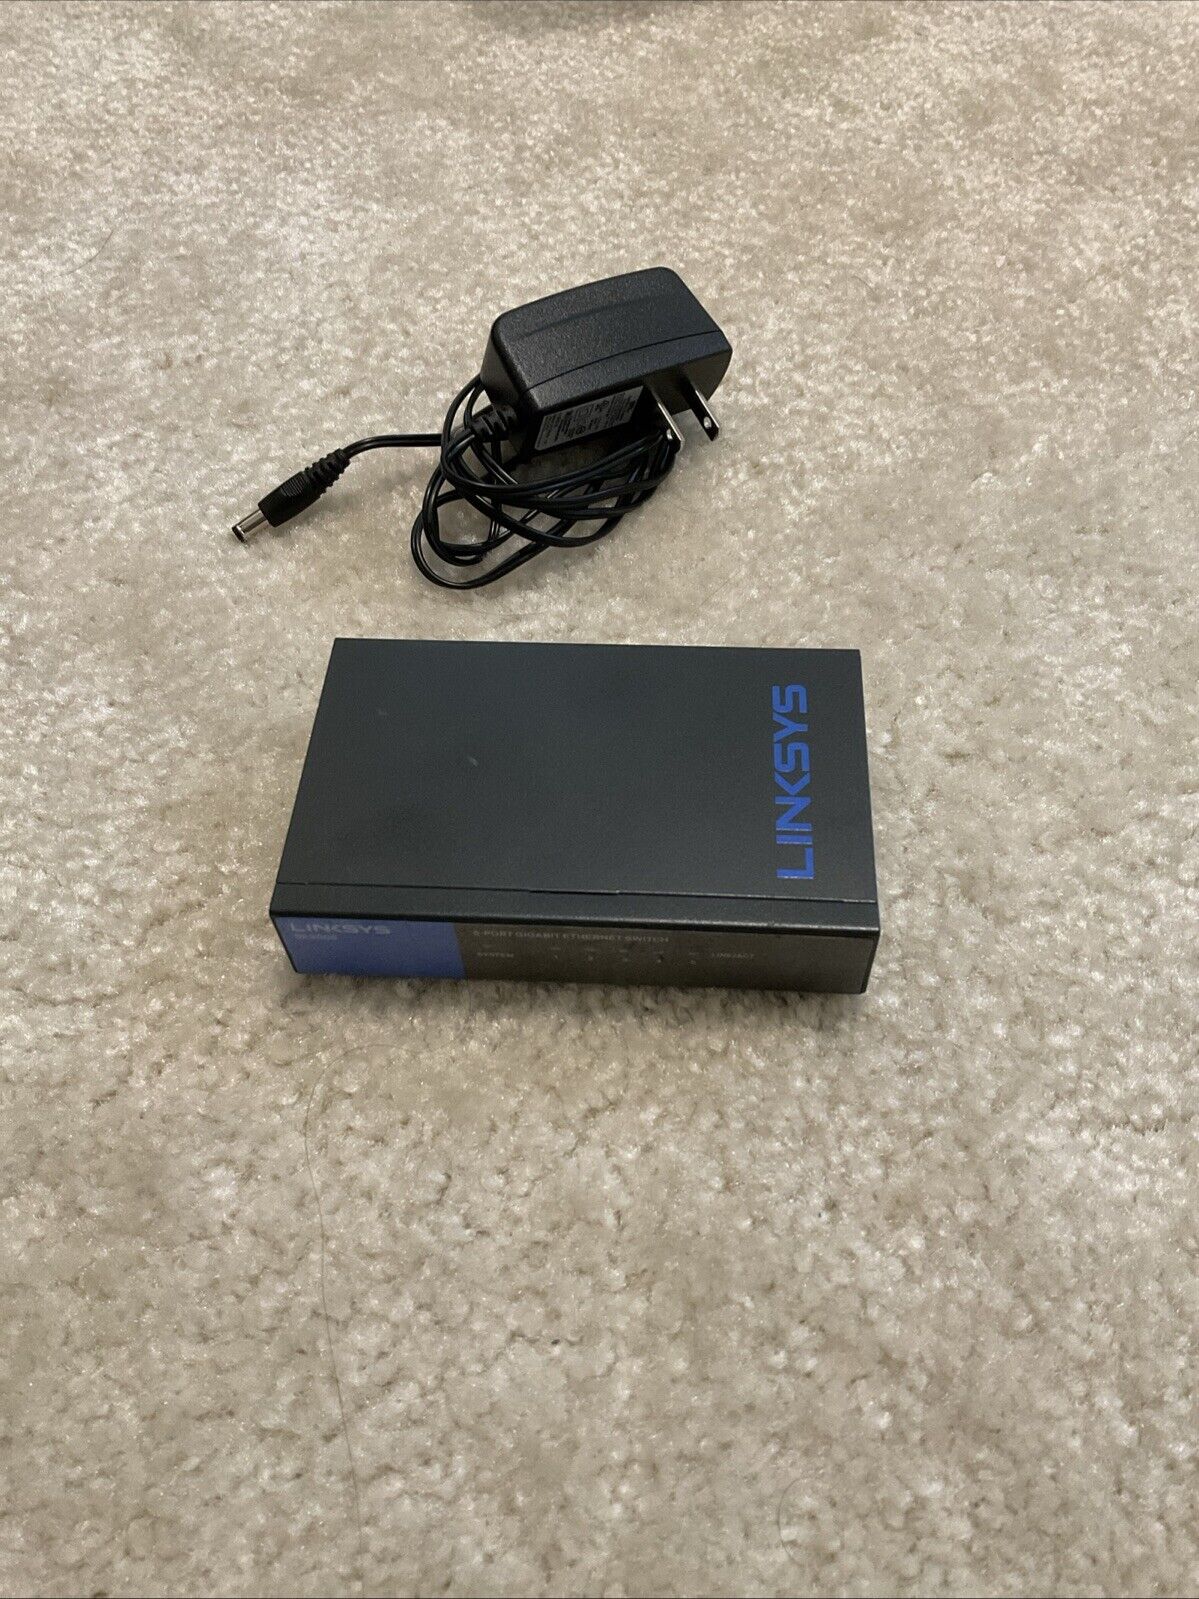 Linksys SE3005 5-port Gigabit Ethernet Switch with AC Adapter